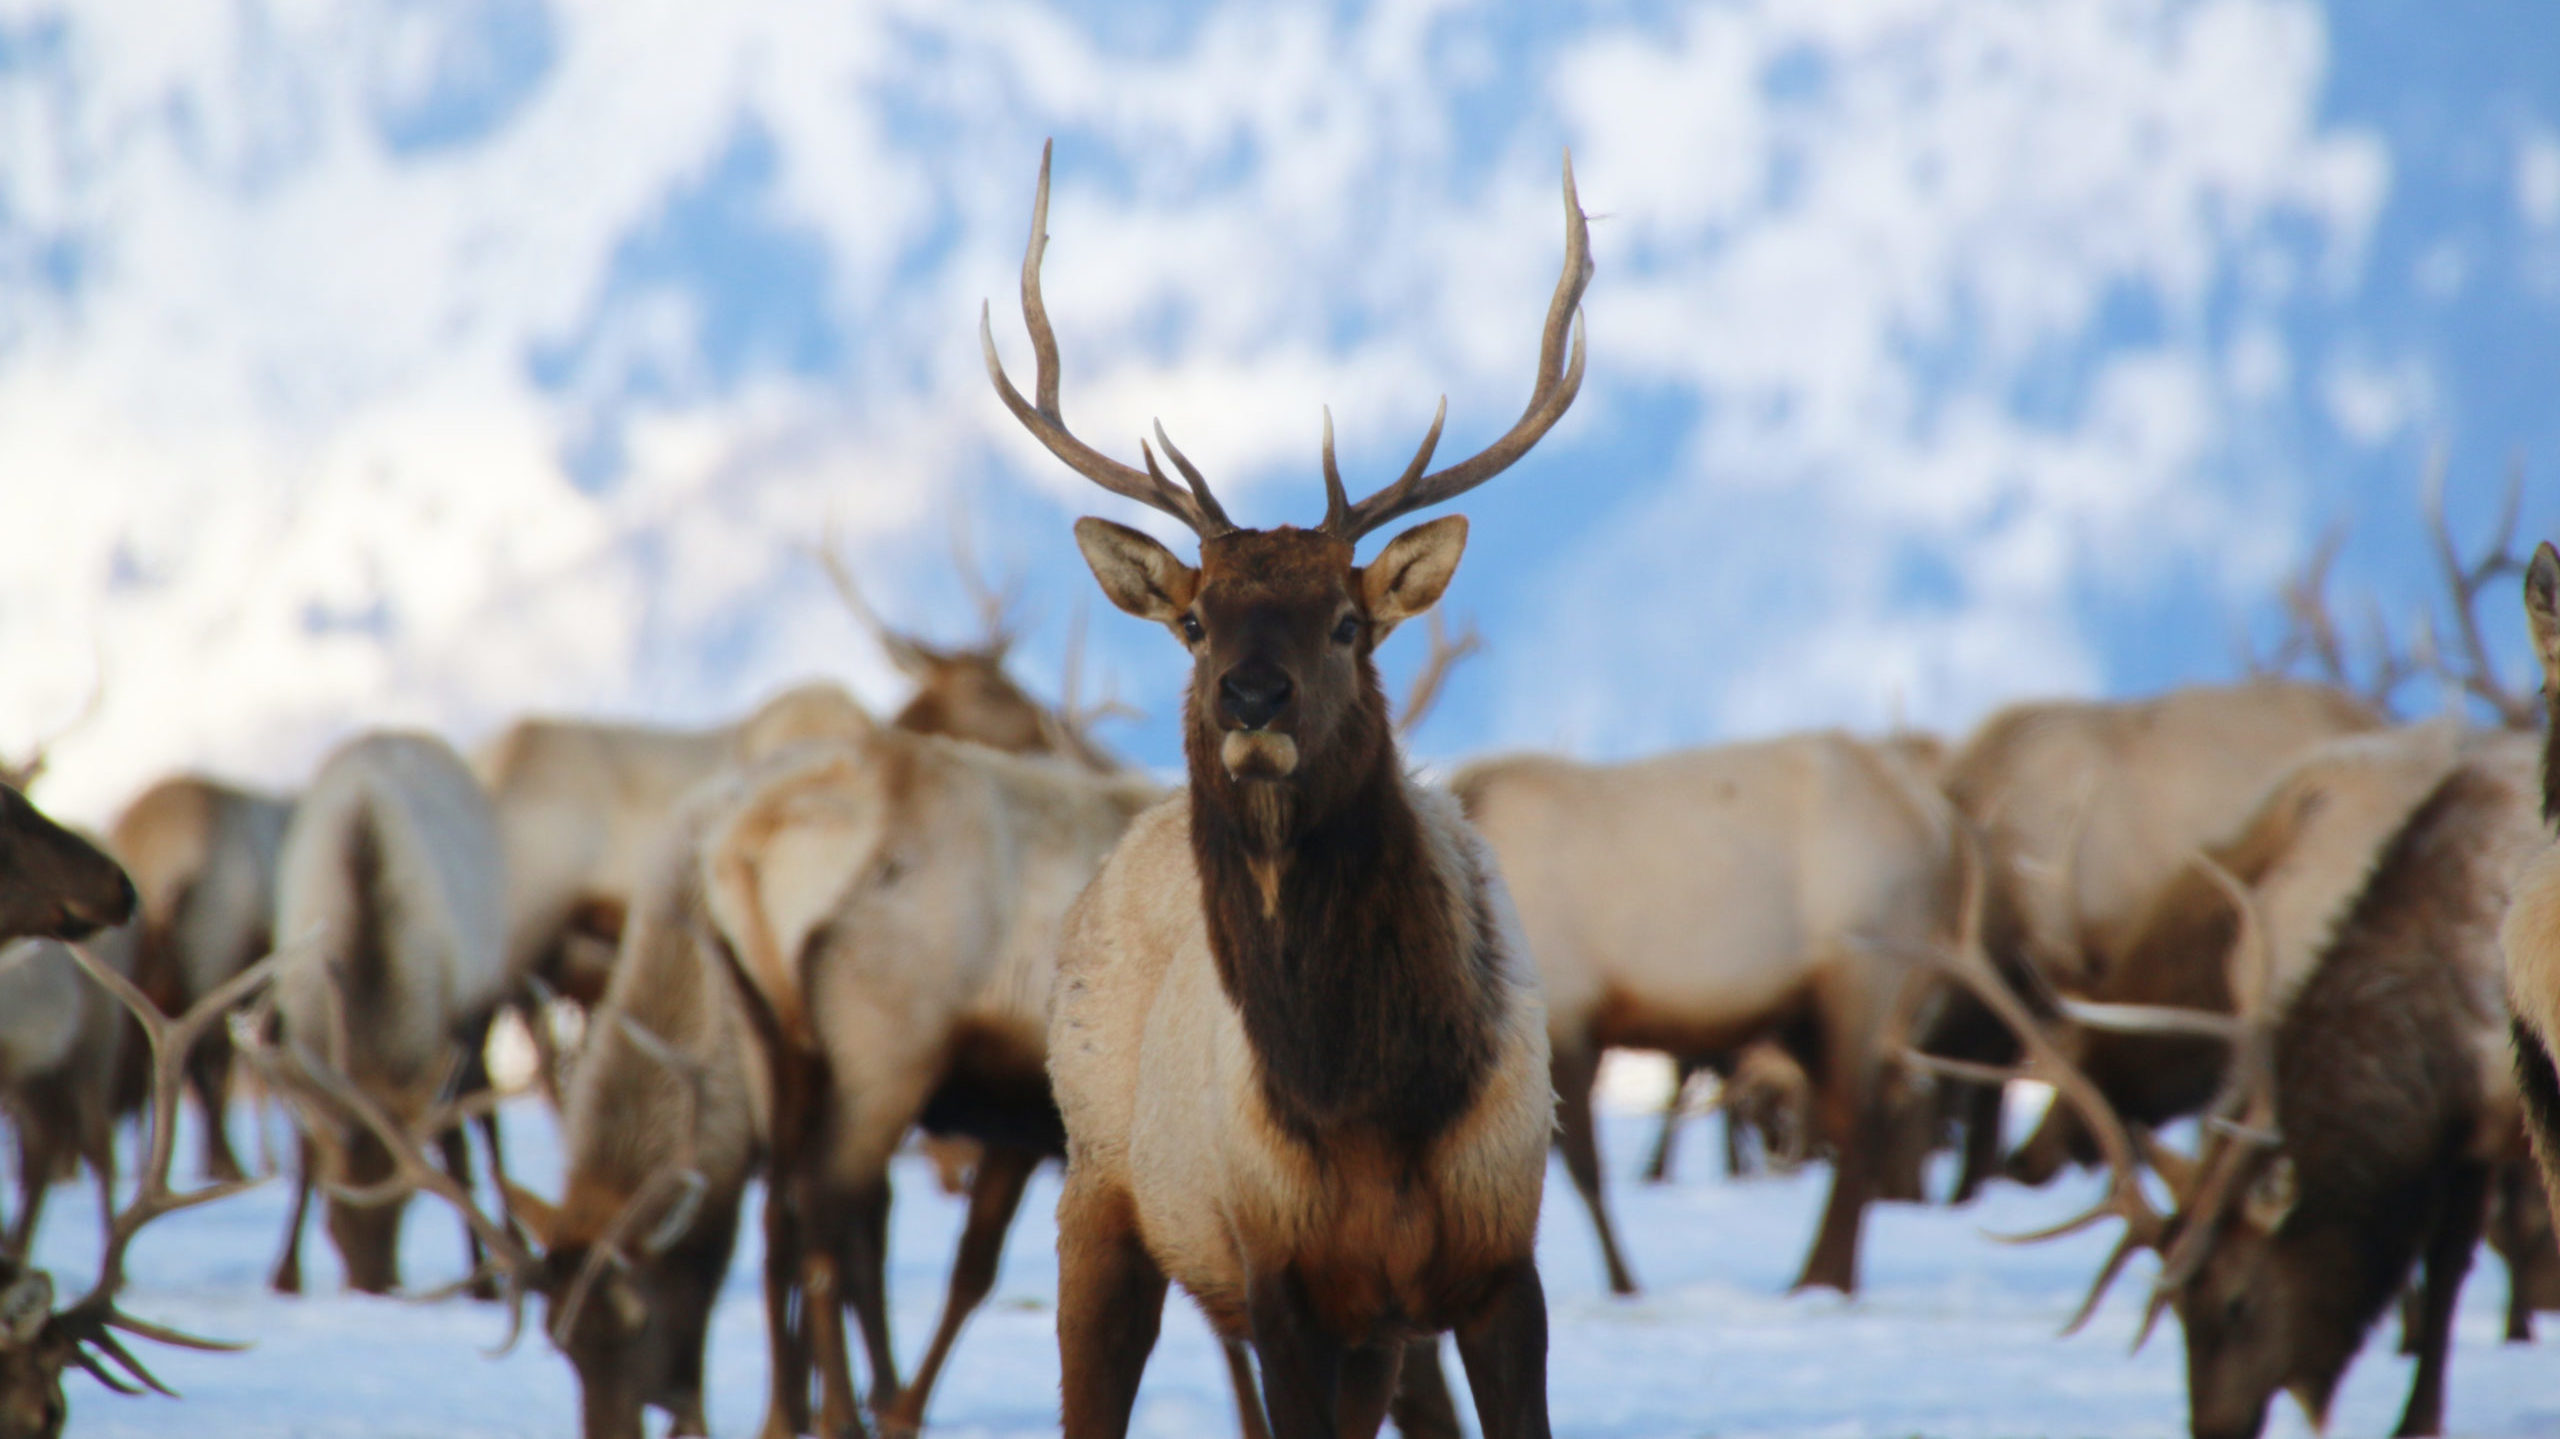 A group of elk in front of a snowy backdrop, with one elk front and center.